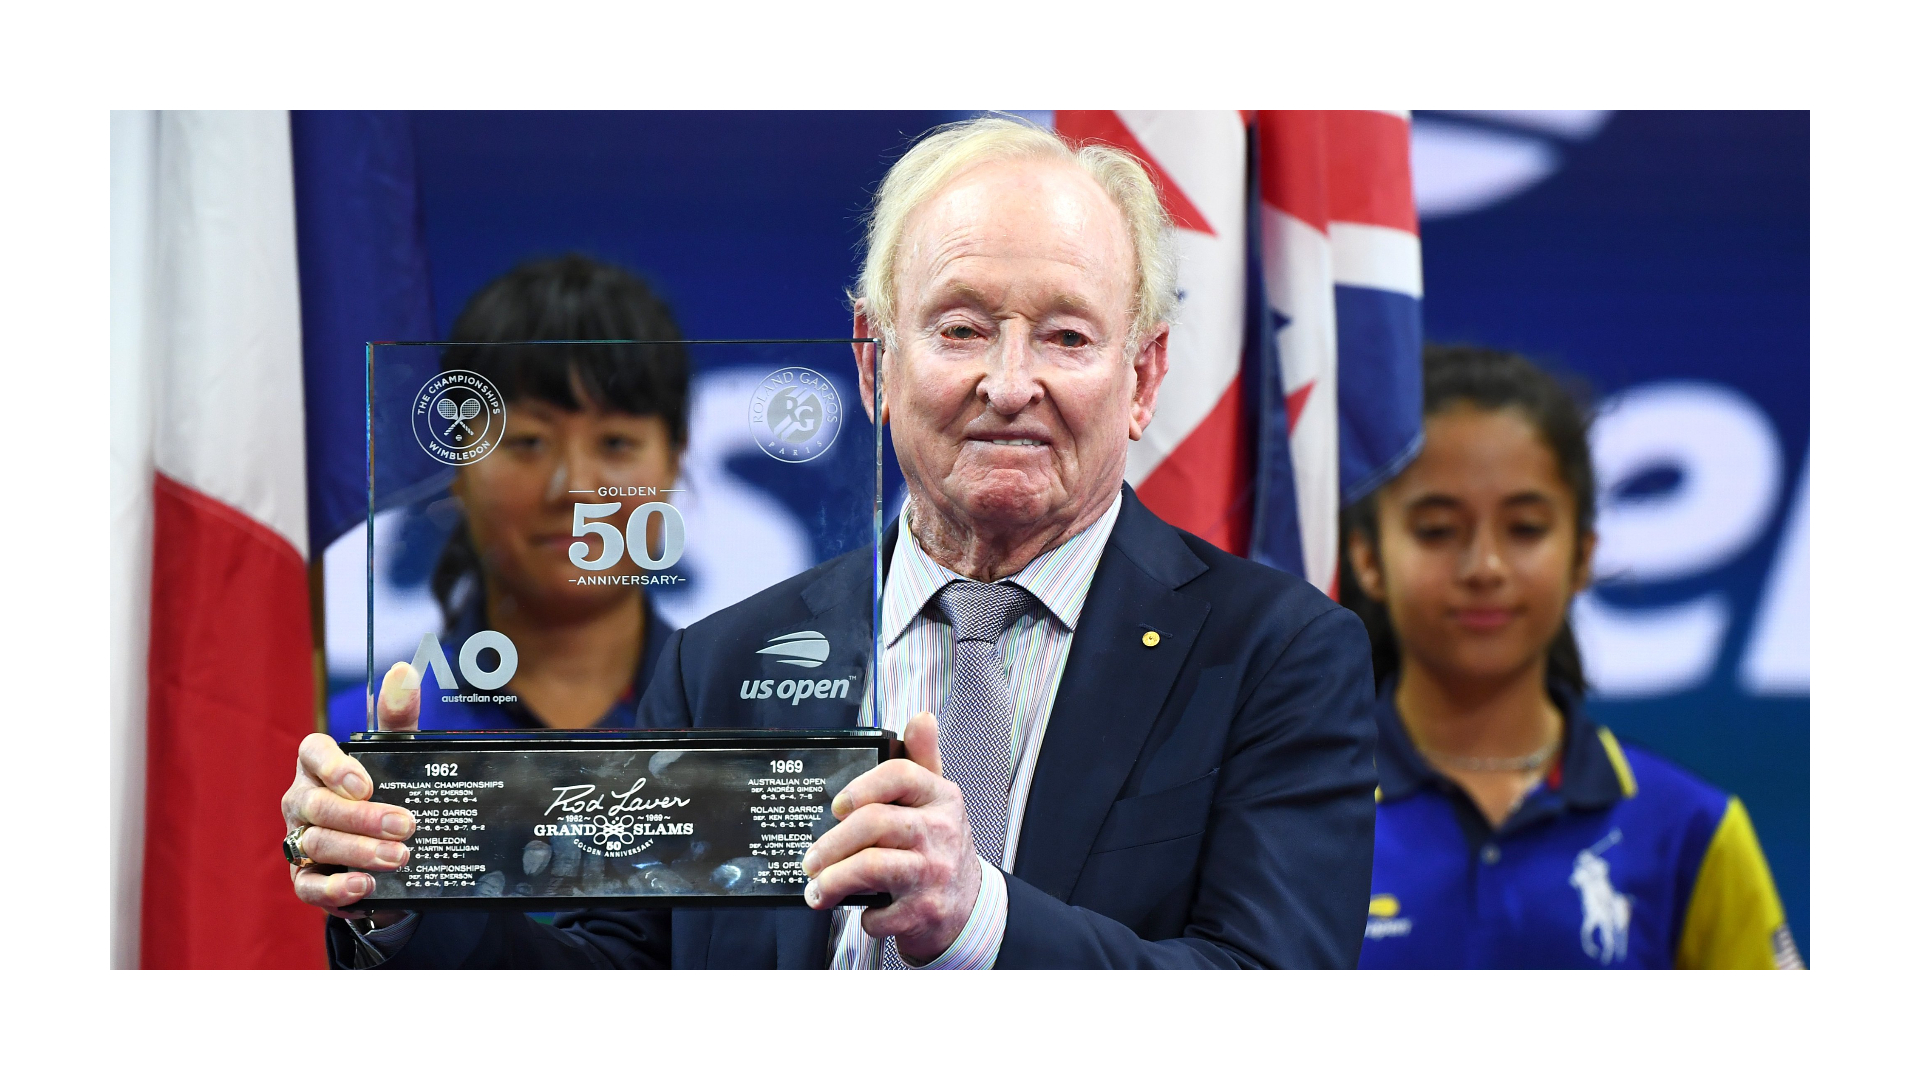 Rod Laver file photo: Credit: US Open Twitter page